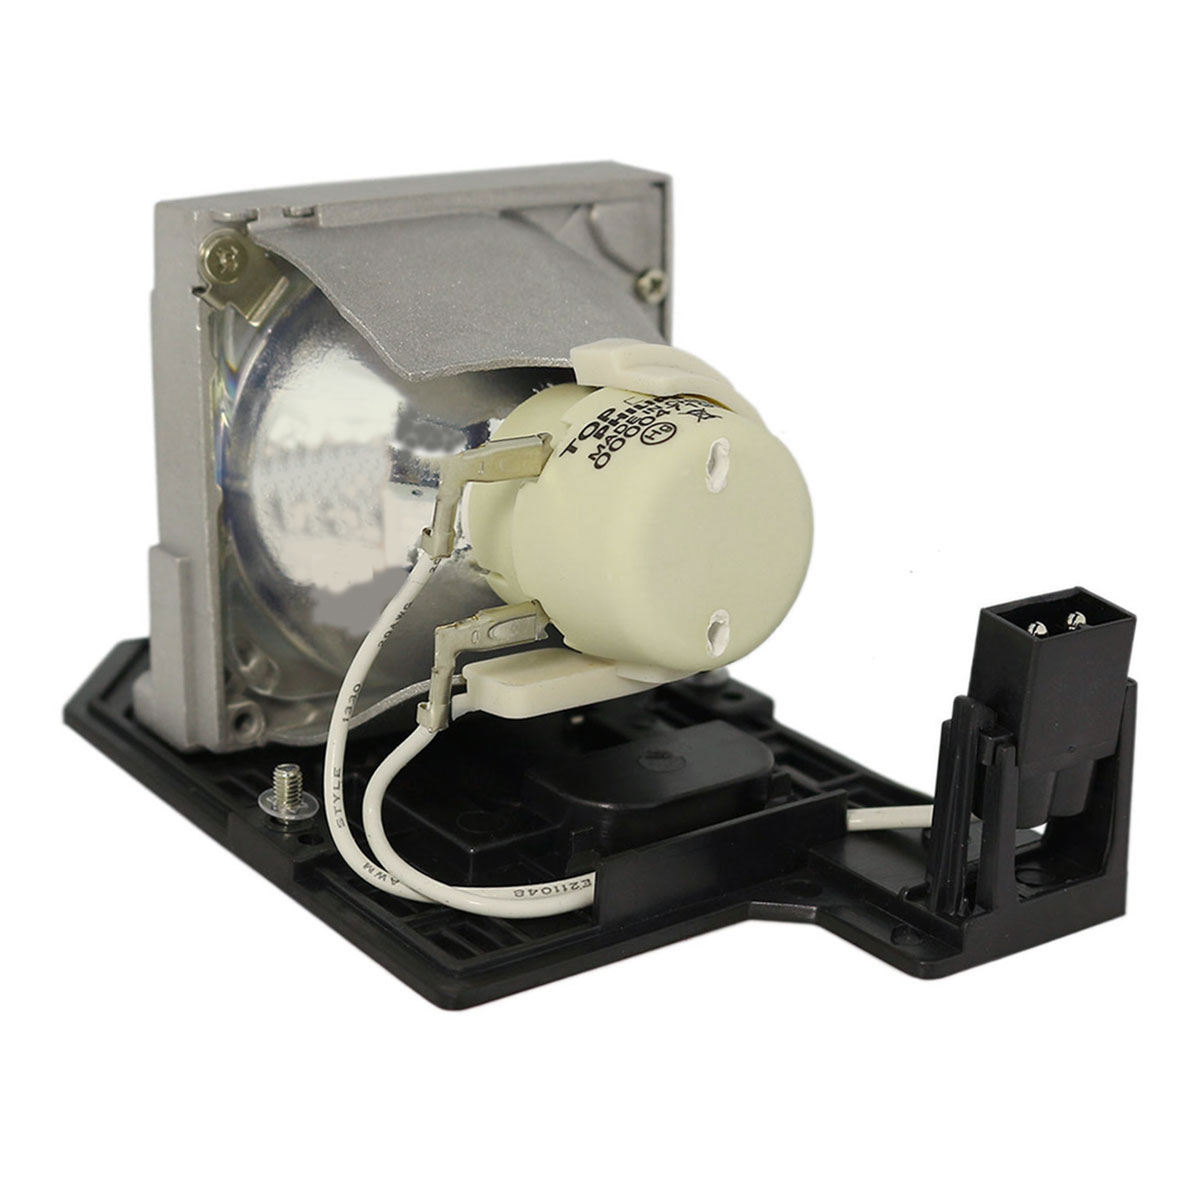 OEM SP.8RU01GC01 Replacement Lamp & Housing for Optoma Projectors - image 5 of 7